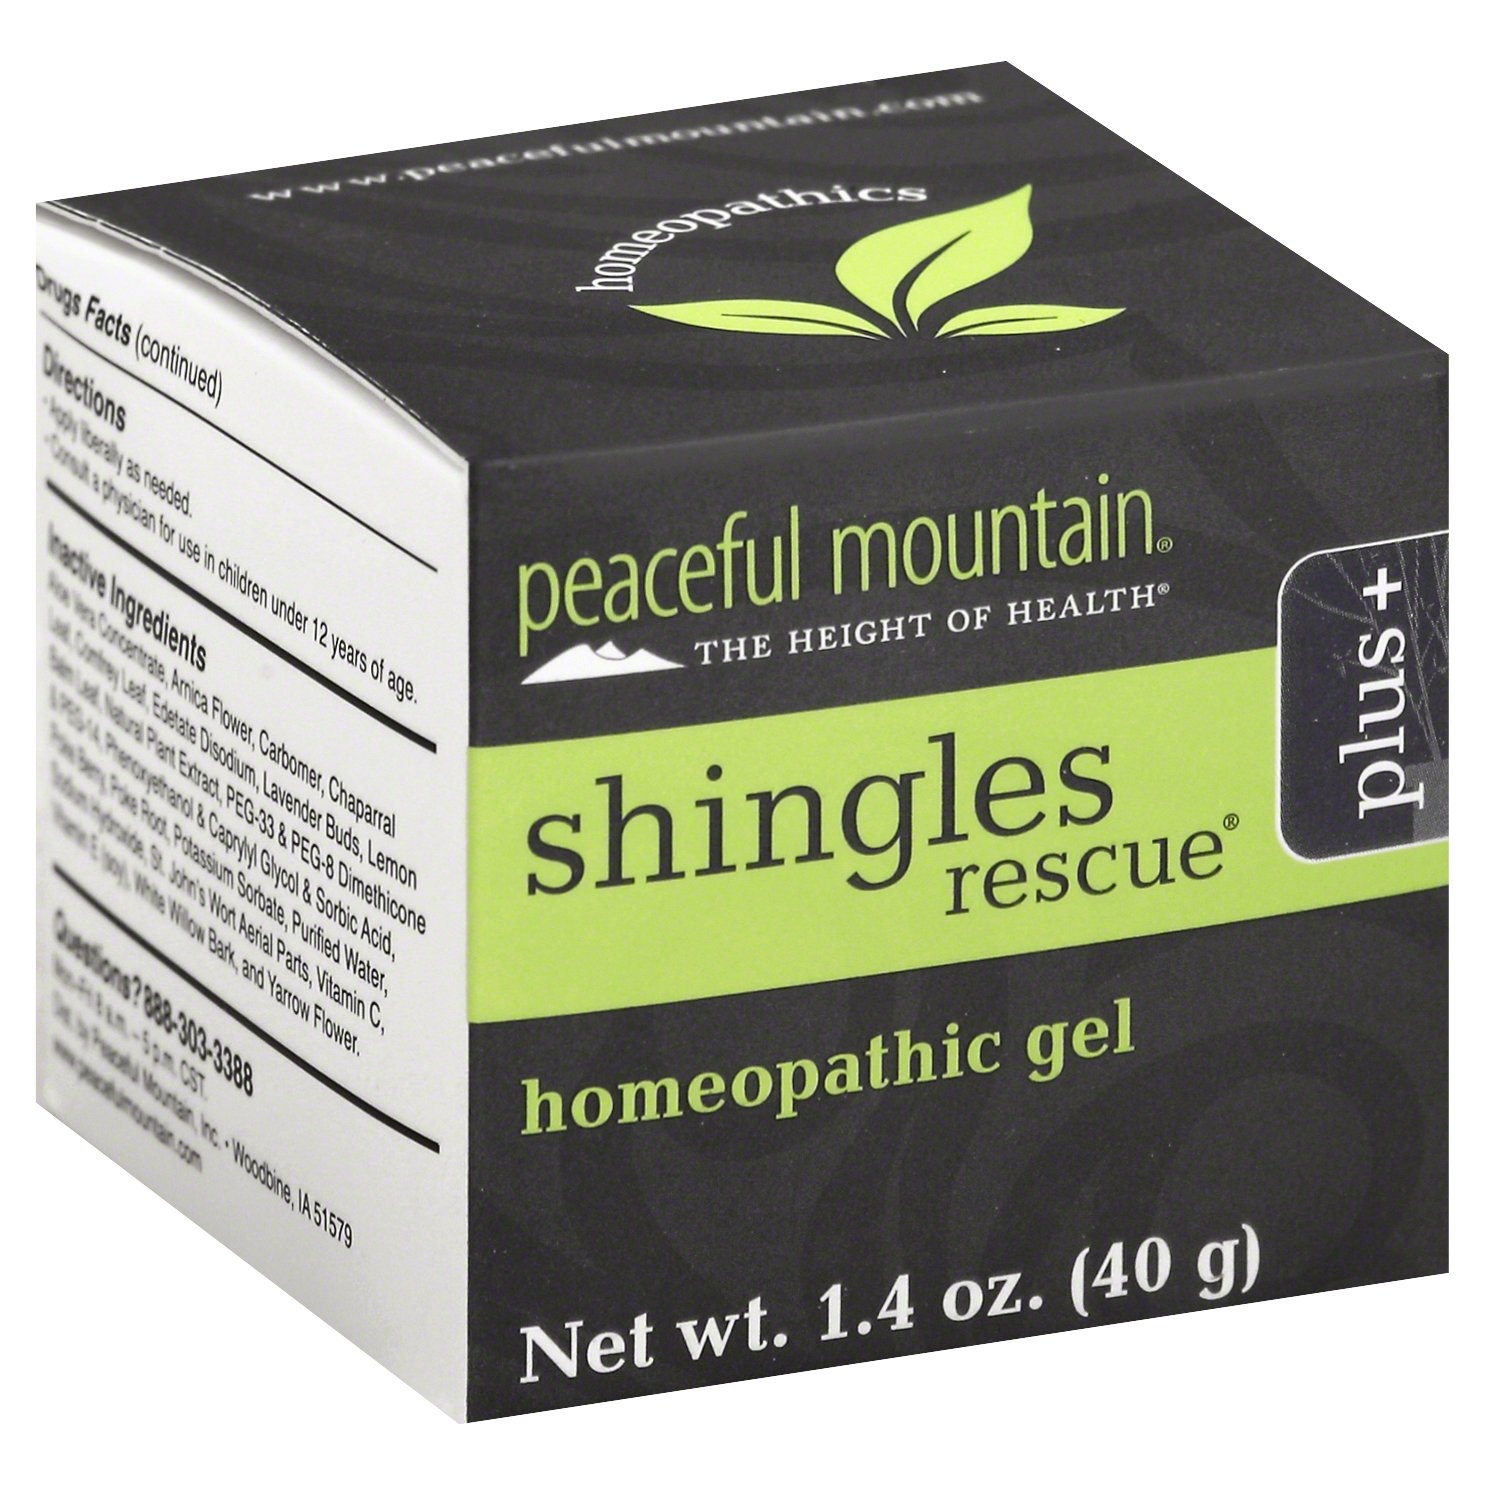 slide 1 of 1, Peaceful Mountain Shingles Rescue Plus Homeopathic Gel, 1.4 oz